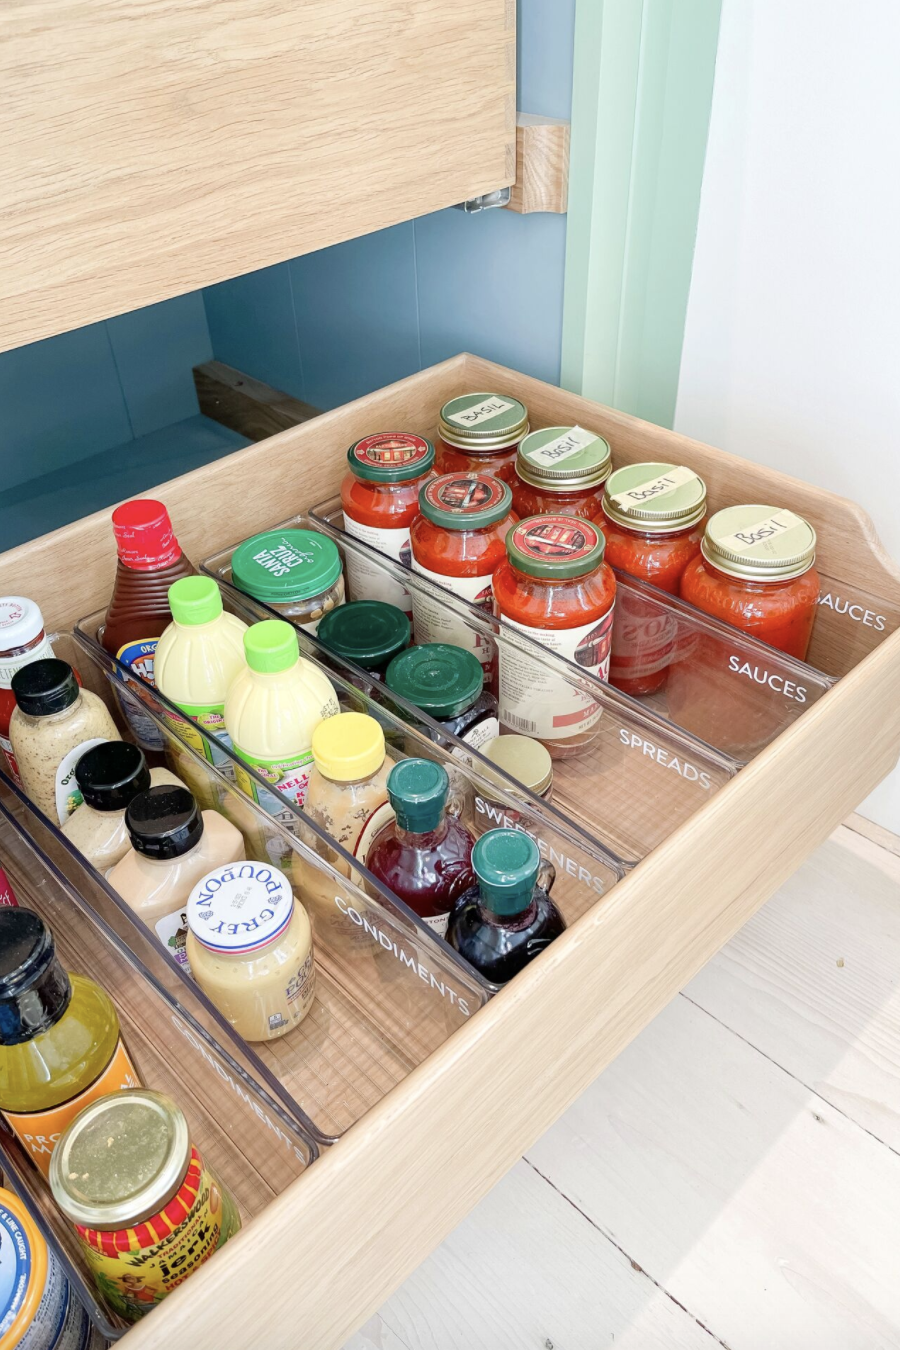 https://hips.hearstapps.com/hmg-prod/images/pantry-organization-ideas-corral-condiments-in-labeled-bins-1649011406.png?crop=0.8910891089108911xw:1xh;center,top&resize=980:*